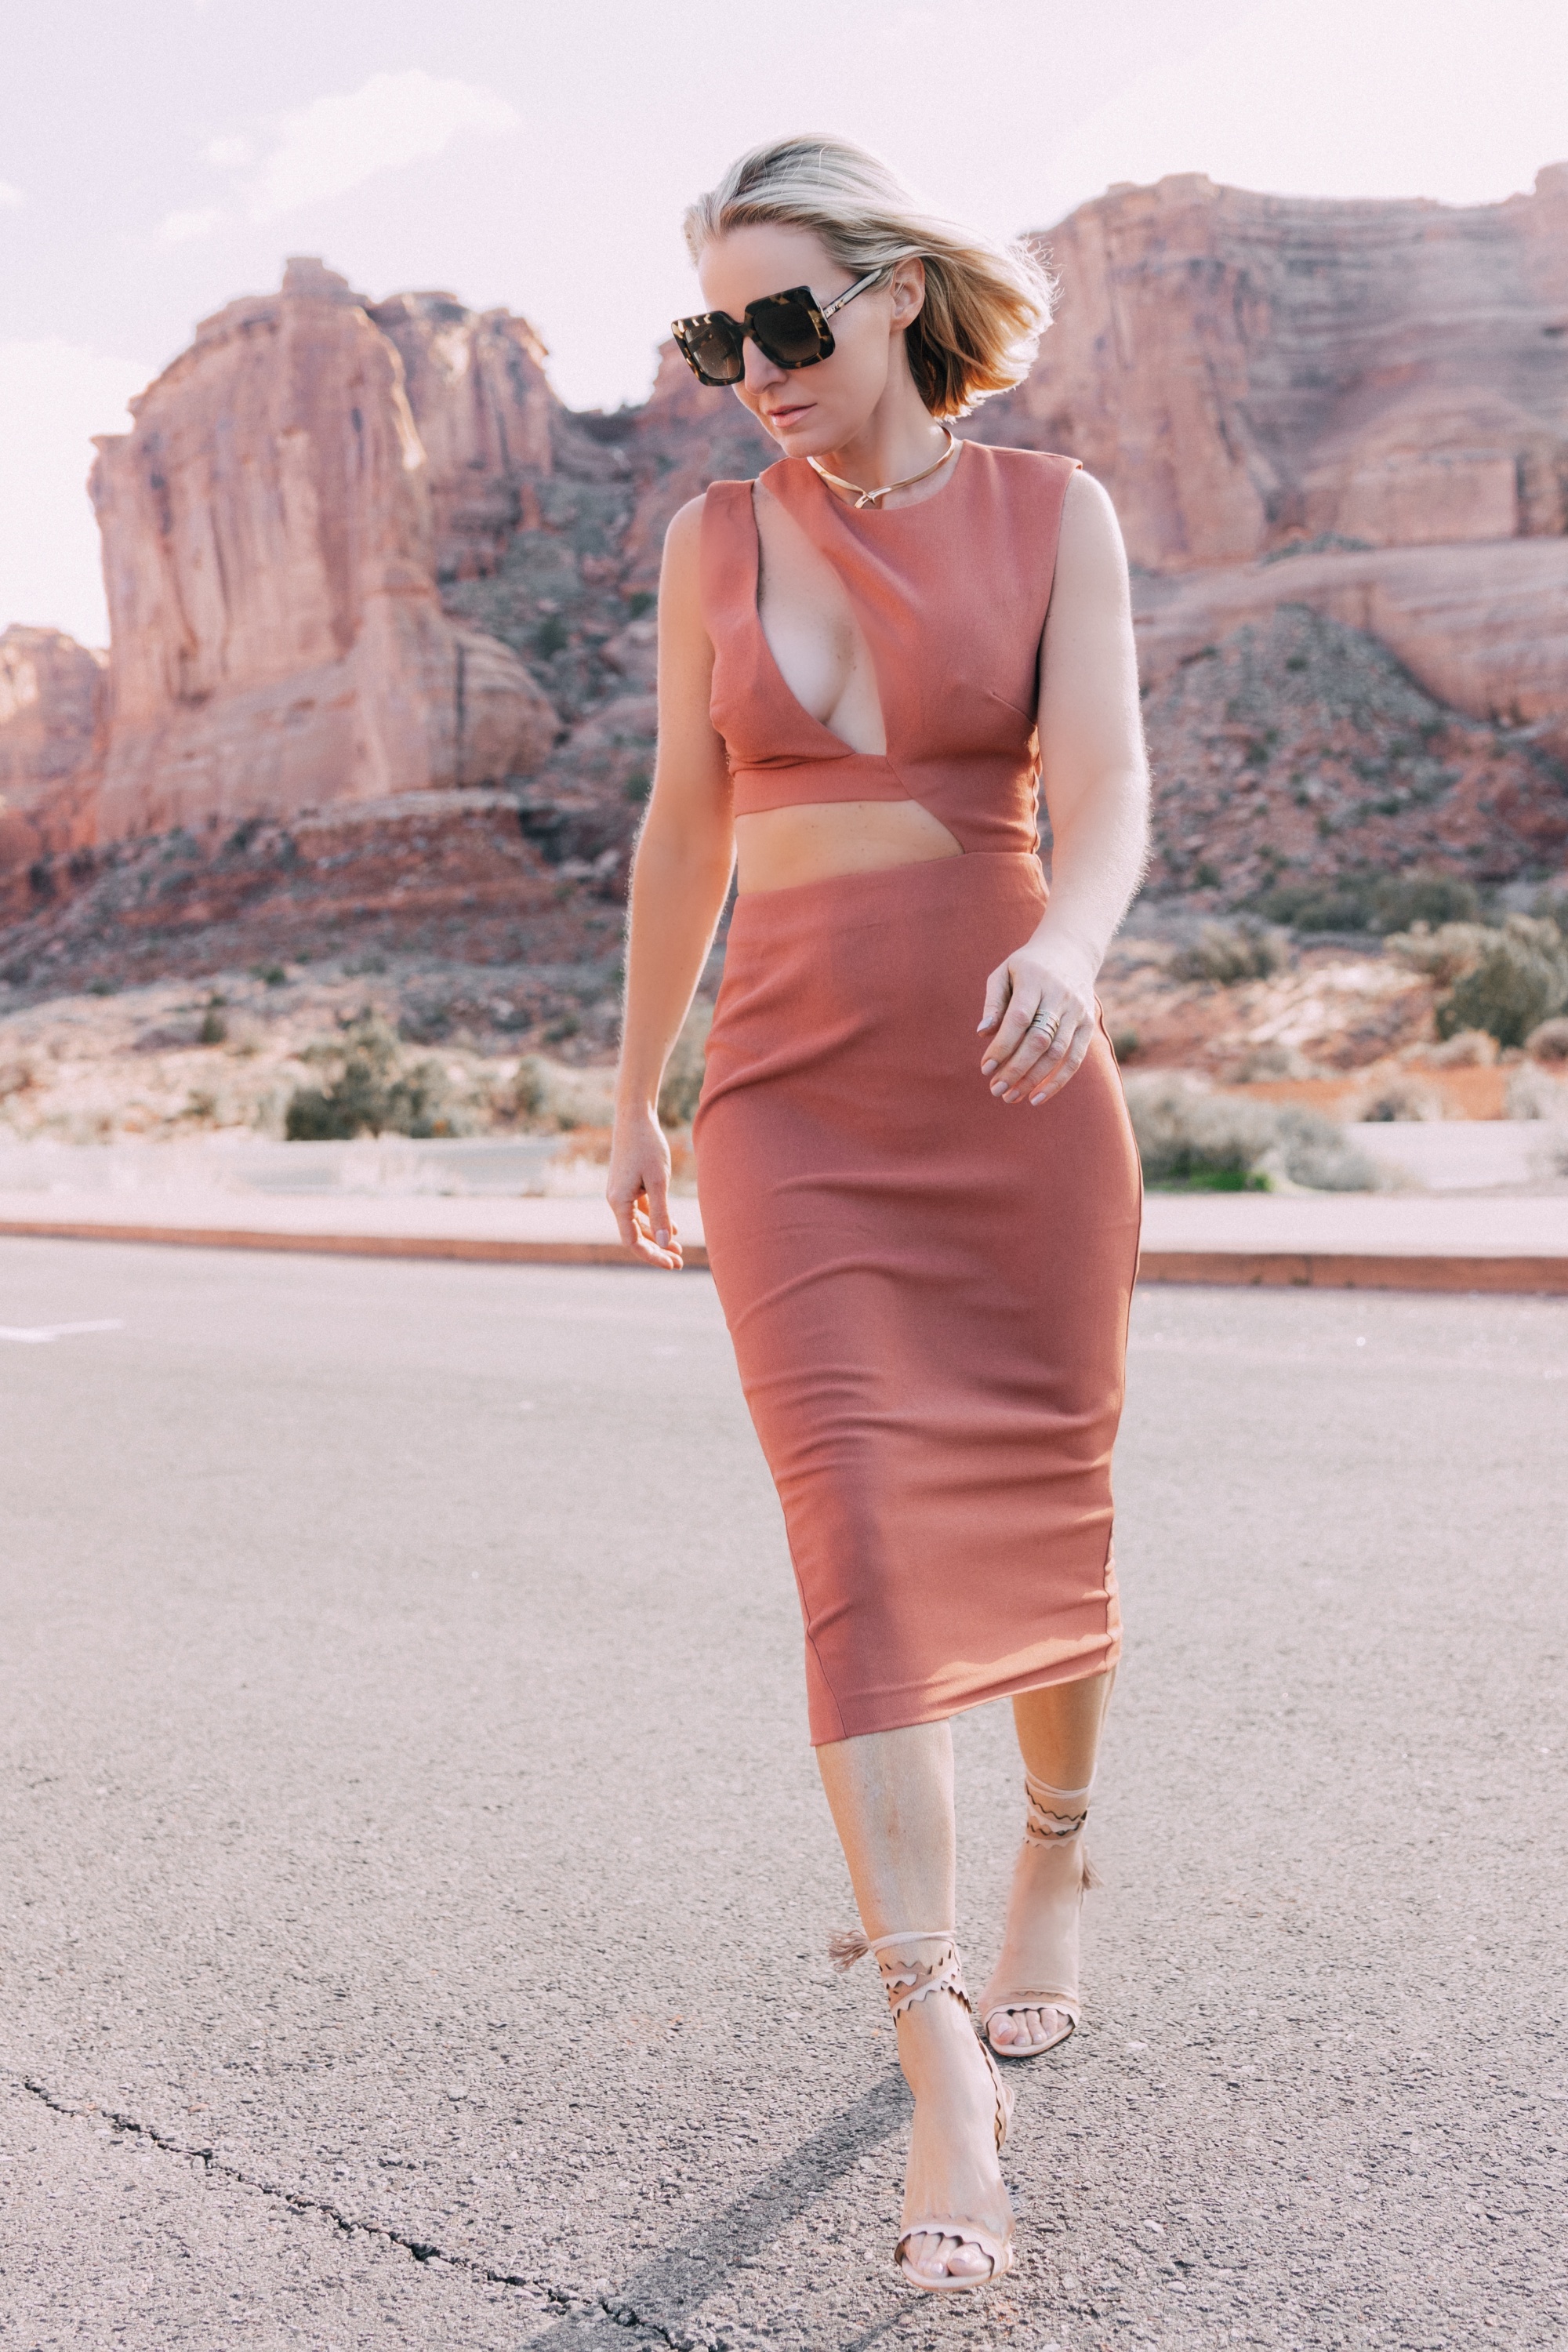 Trendy Rust Colored Midi Dress with Sexy Cutouts on fashion over 40 blogger Erin Busbee in Moab, Utah #3